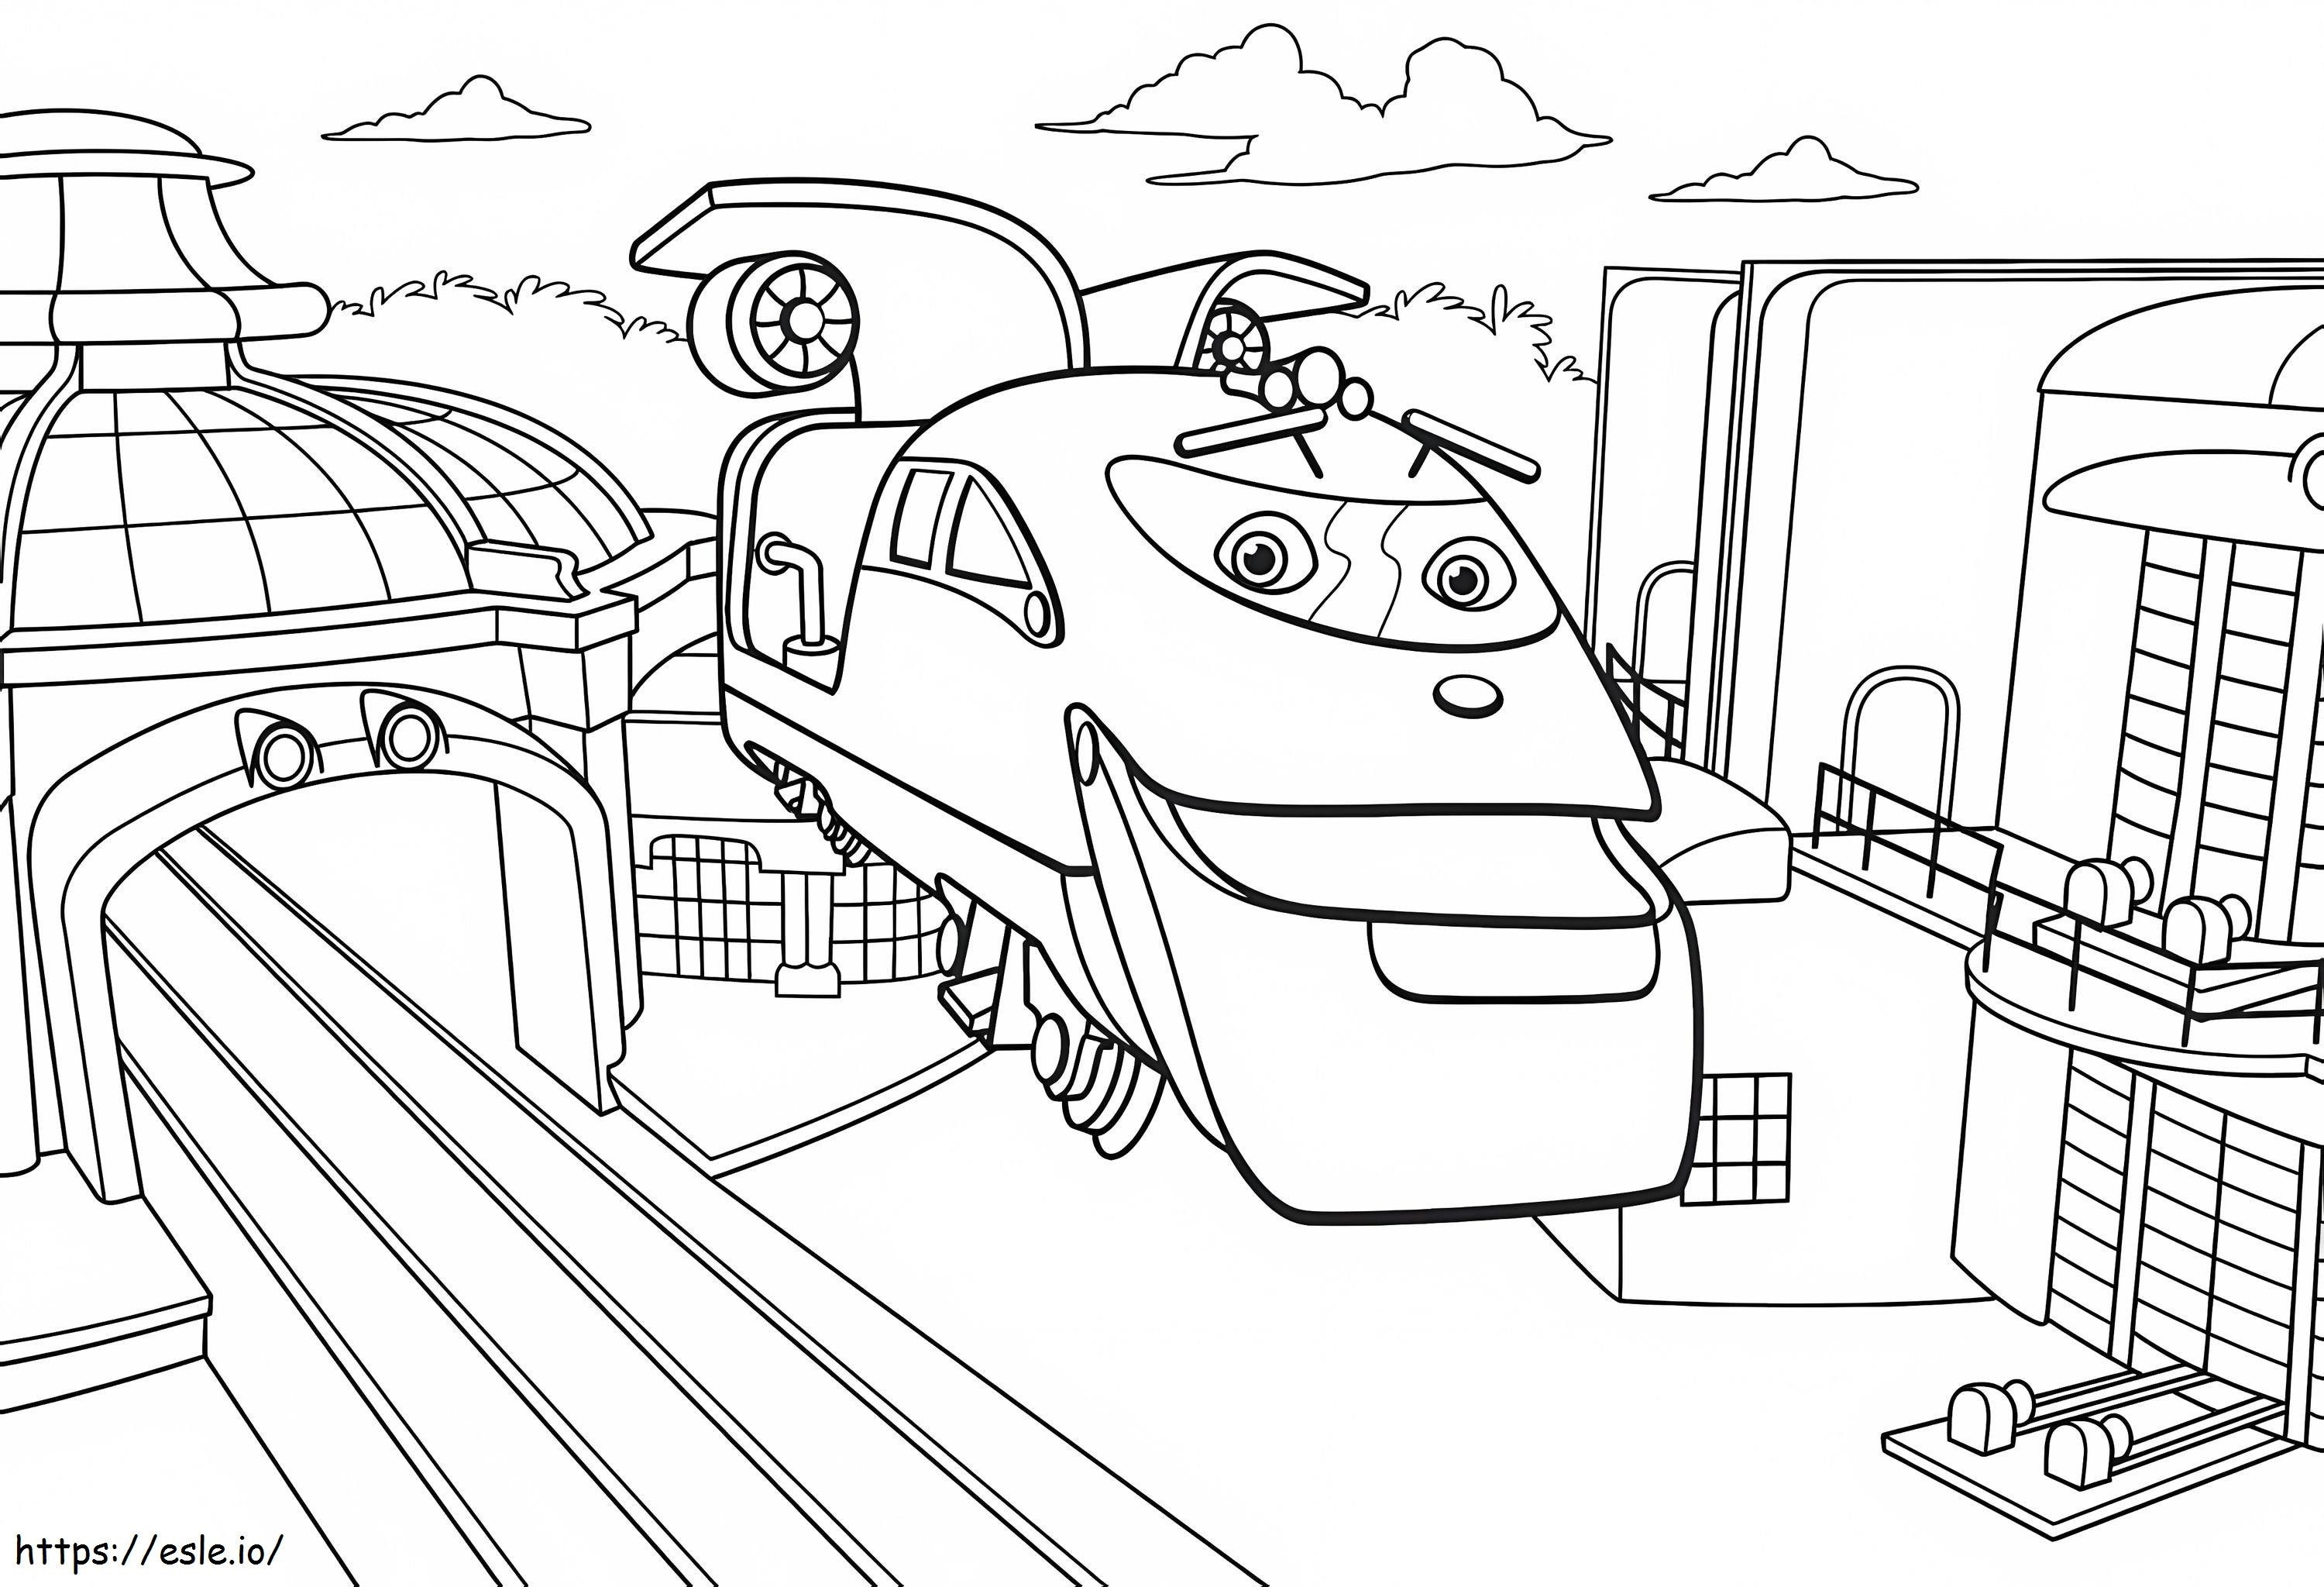 Action Chugger In Chuggington coloring page